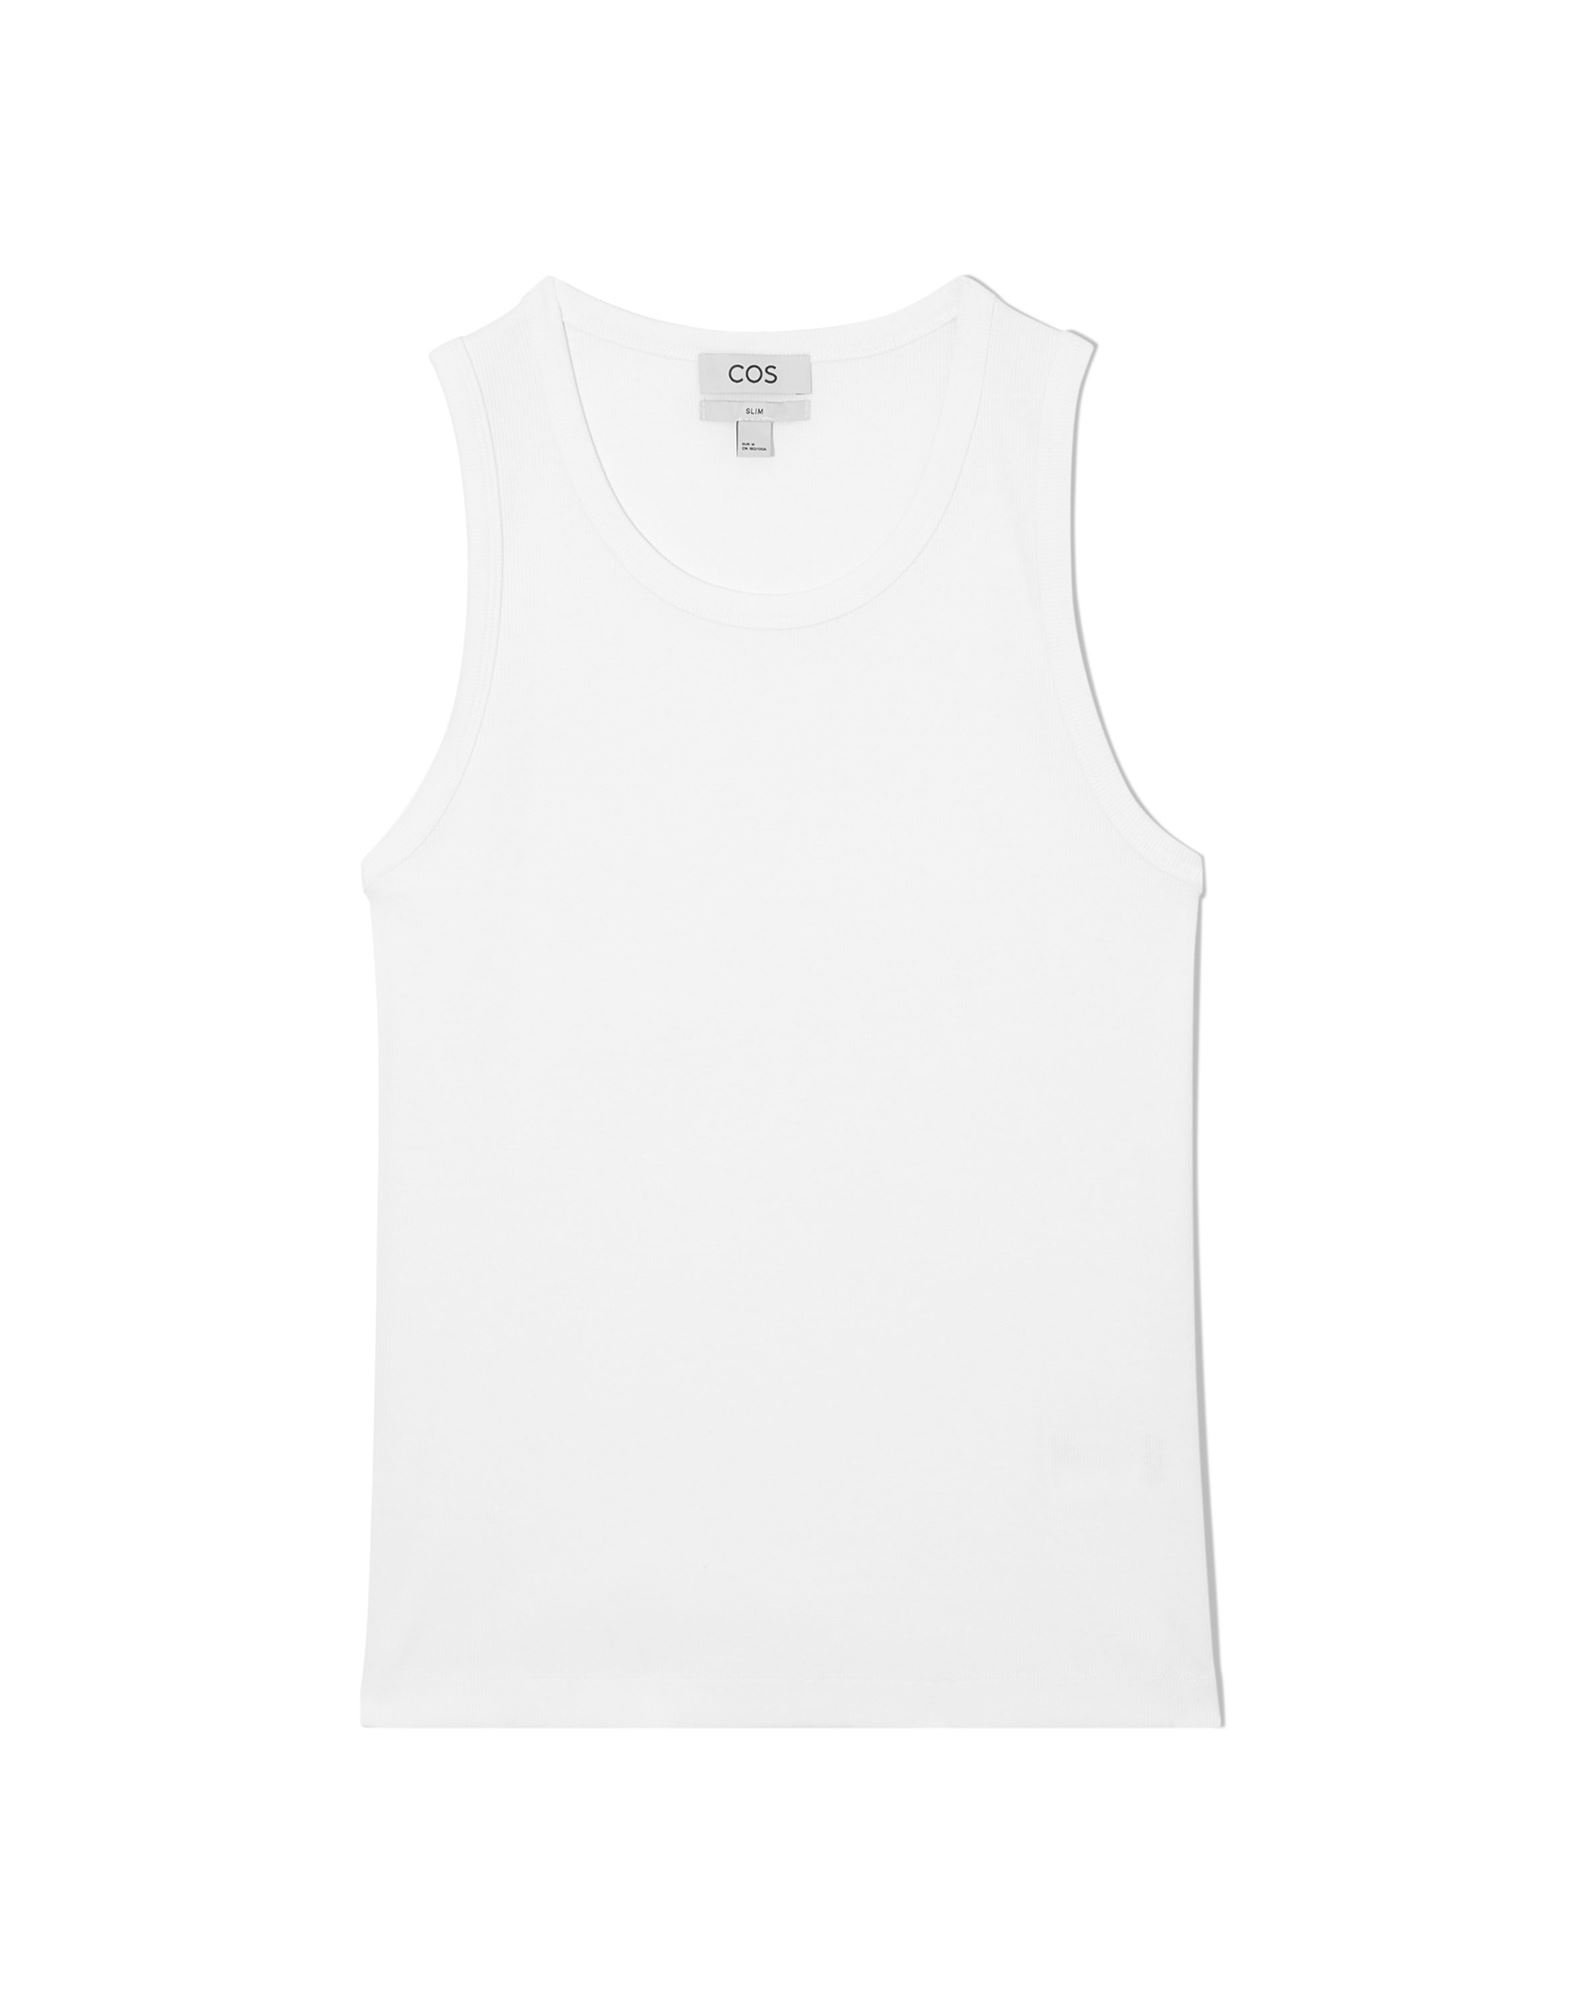 COS COS MAN TANK TOP WHITE SIZE S ORGANIC COTTON, RECYCLED COTTON, ELASTANE